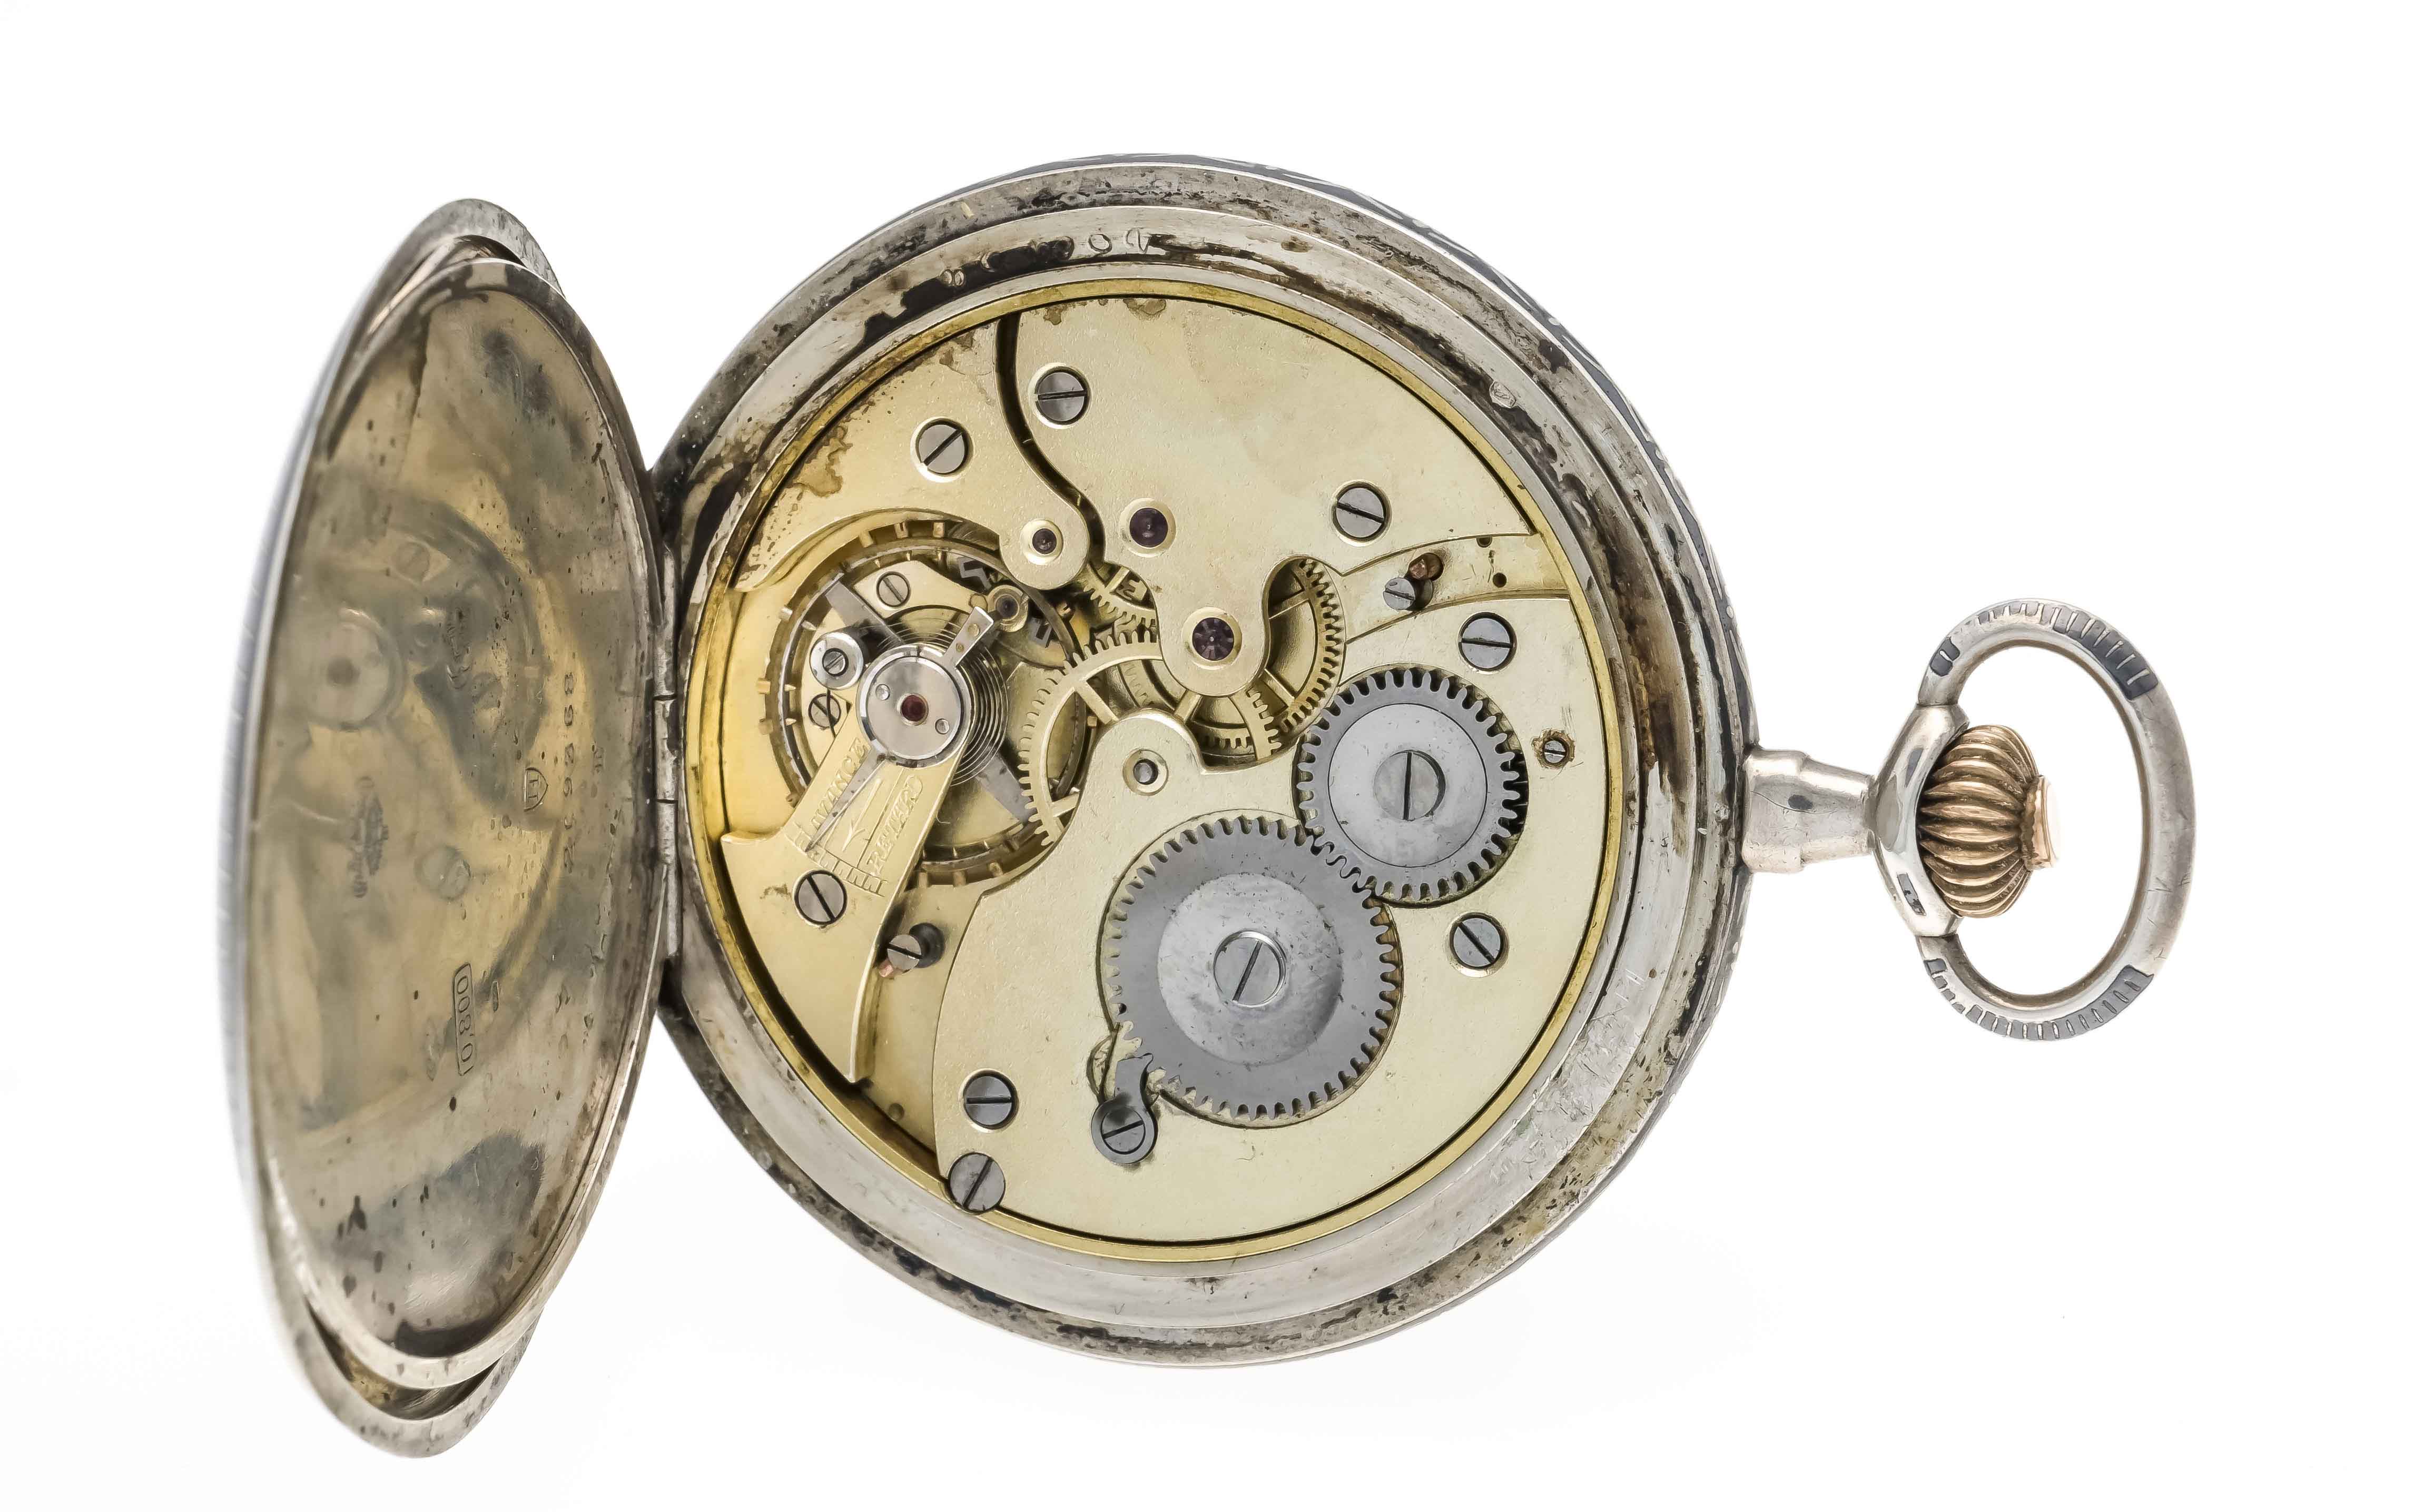 A gentleman's pocket watch with sprung cover in fine Tula Niello technique, 3 covers silver 800/000, - Image 2 of 3